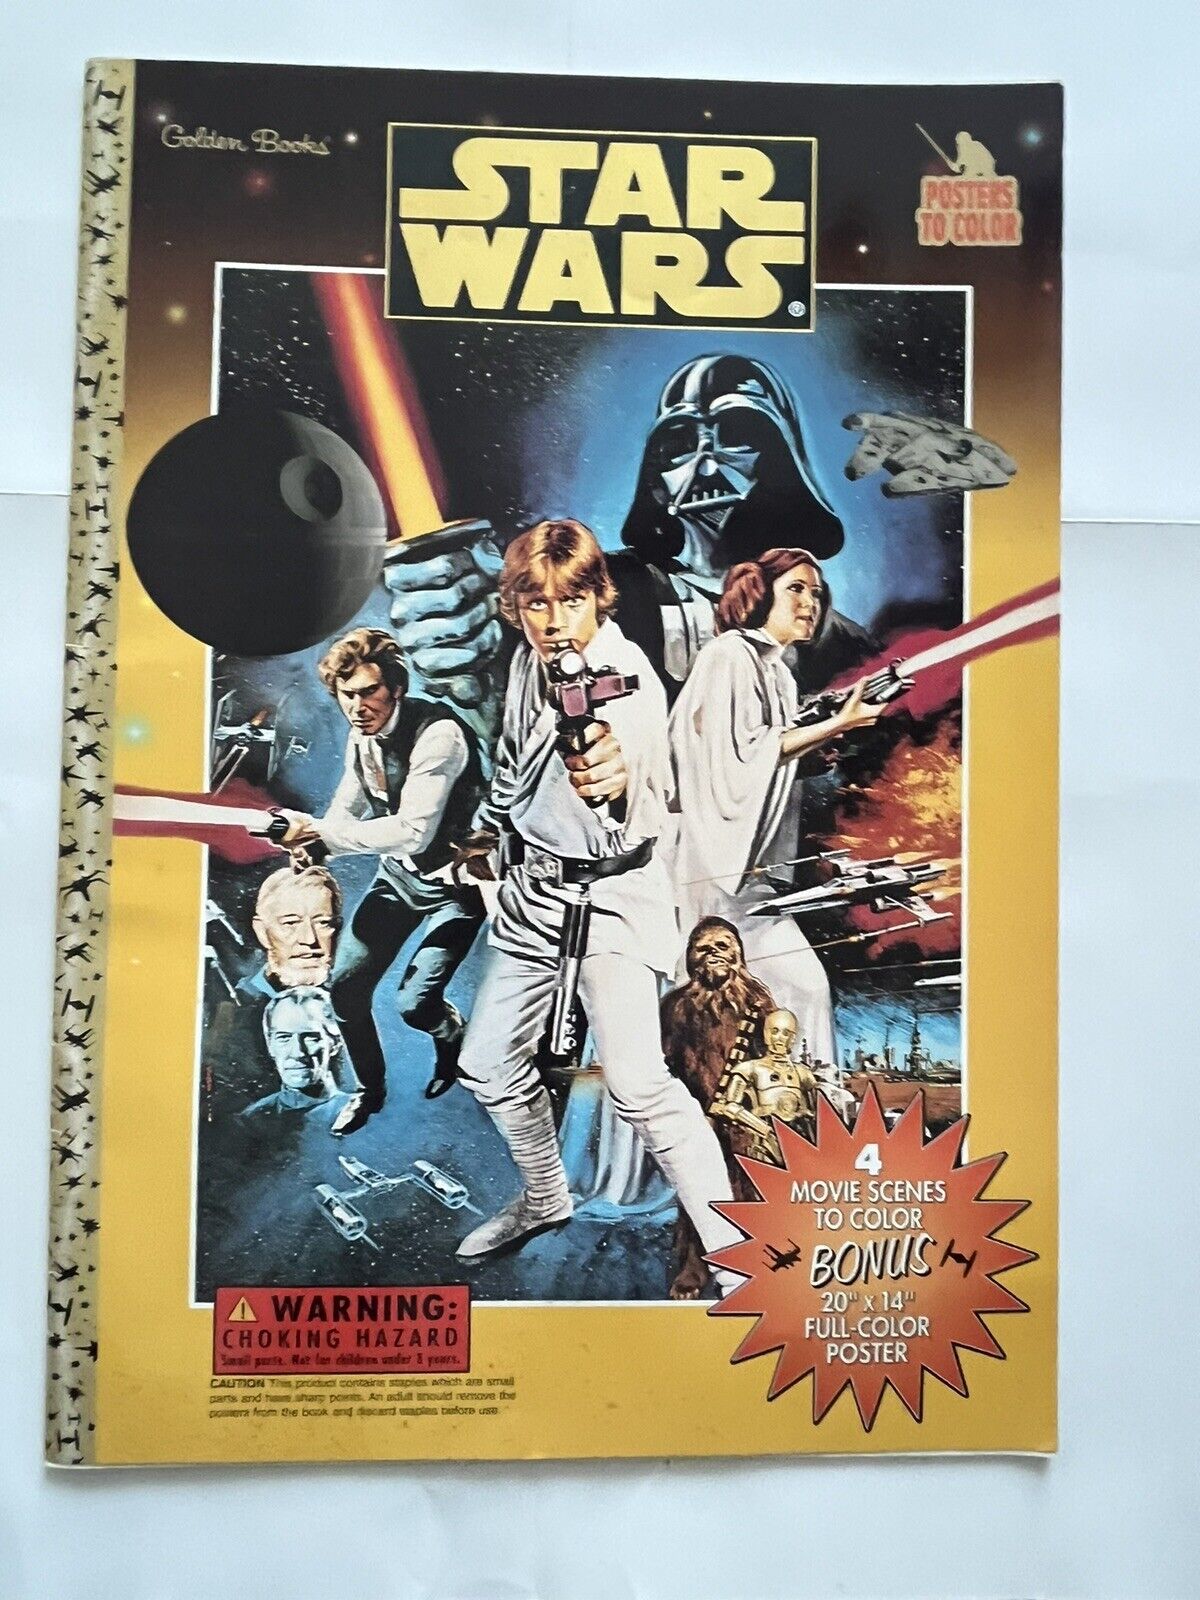 Star Wars Coloring Book Never Used Movie Poster In Middle.